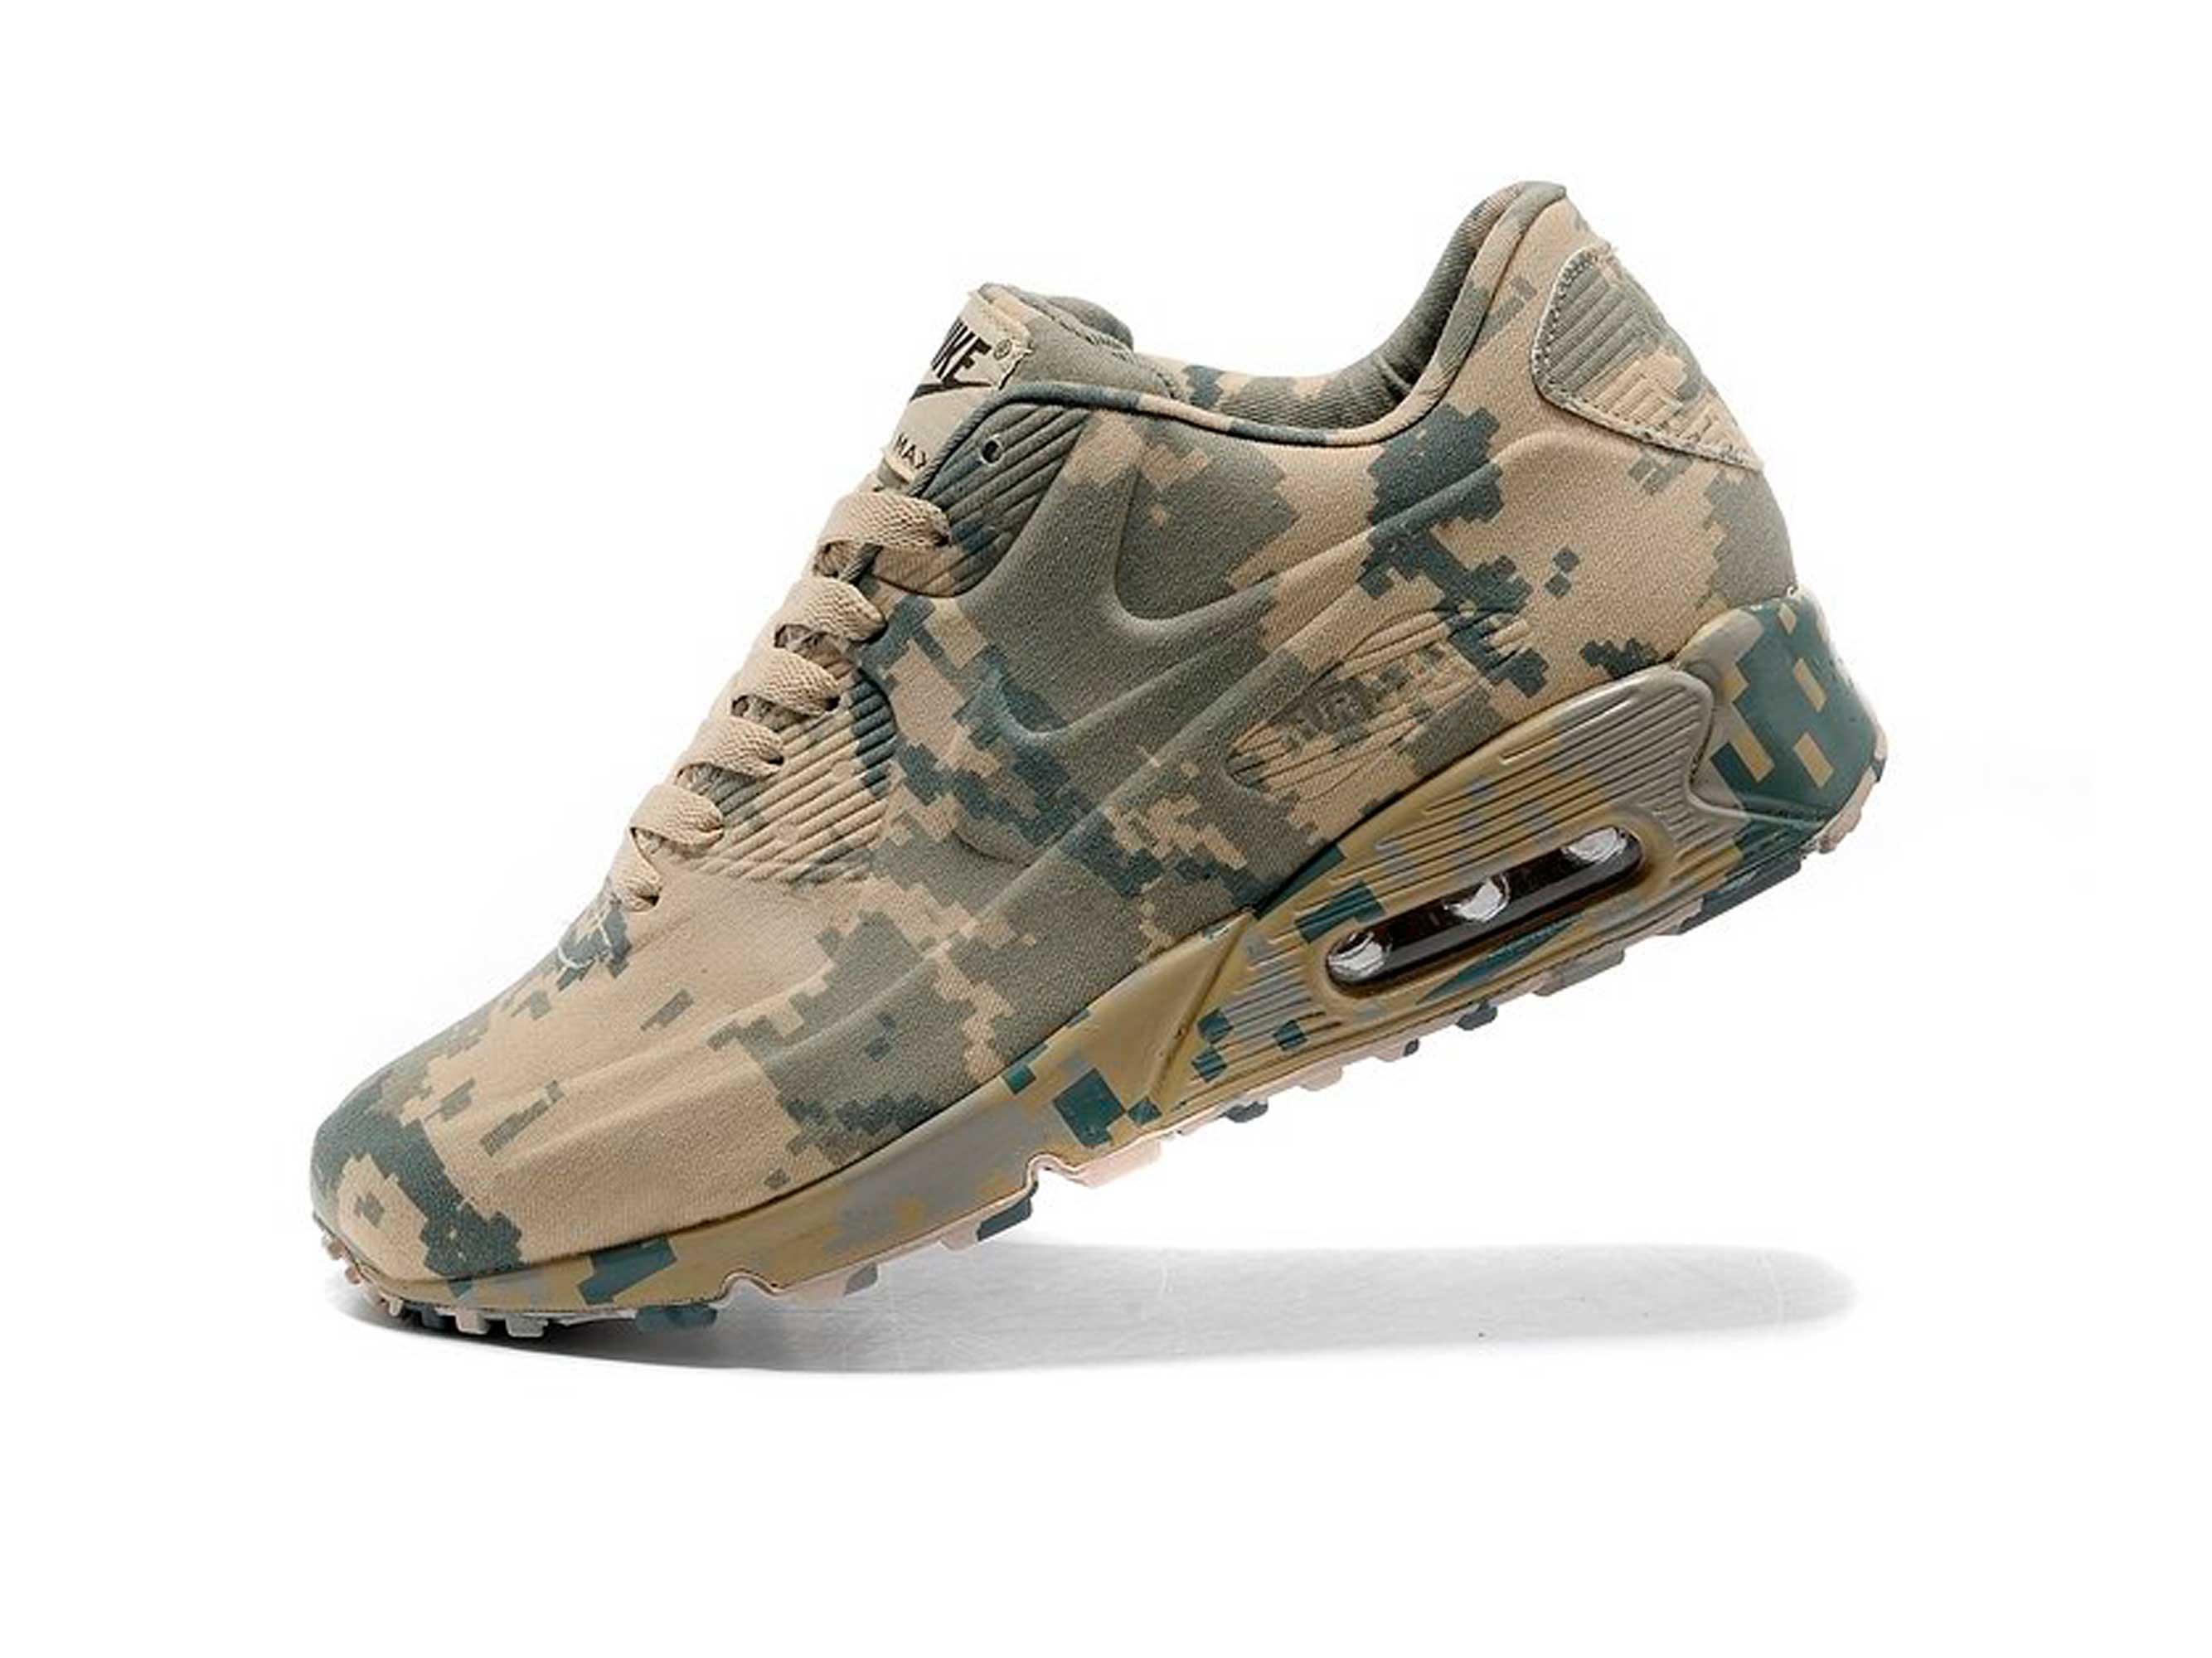 Nike Air Max 90 VT Military Camouflage